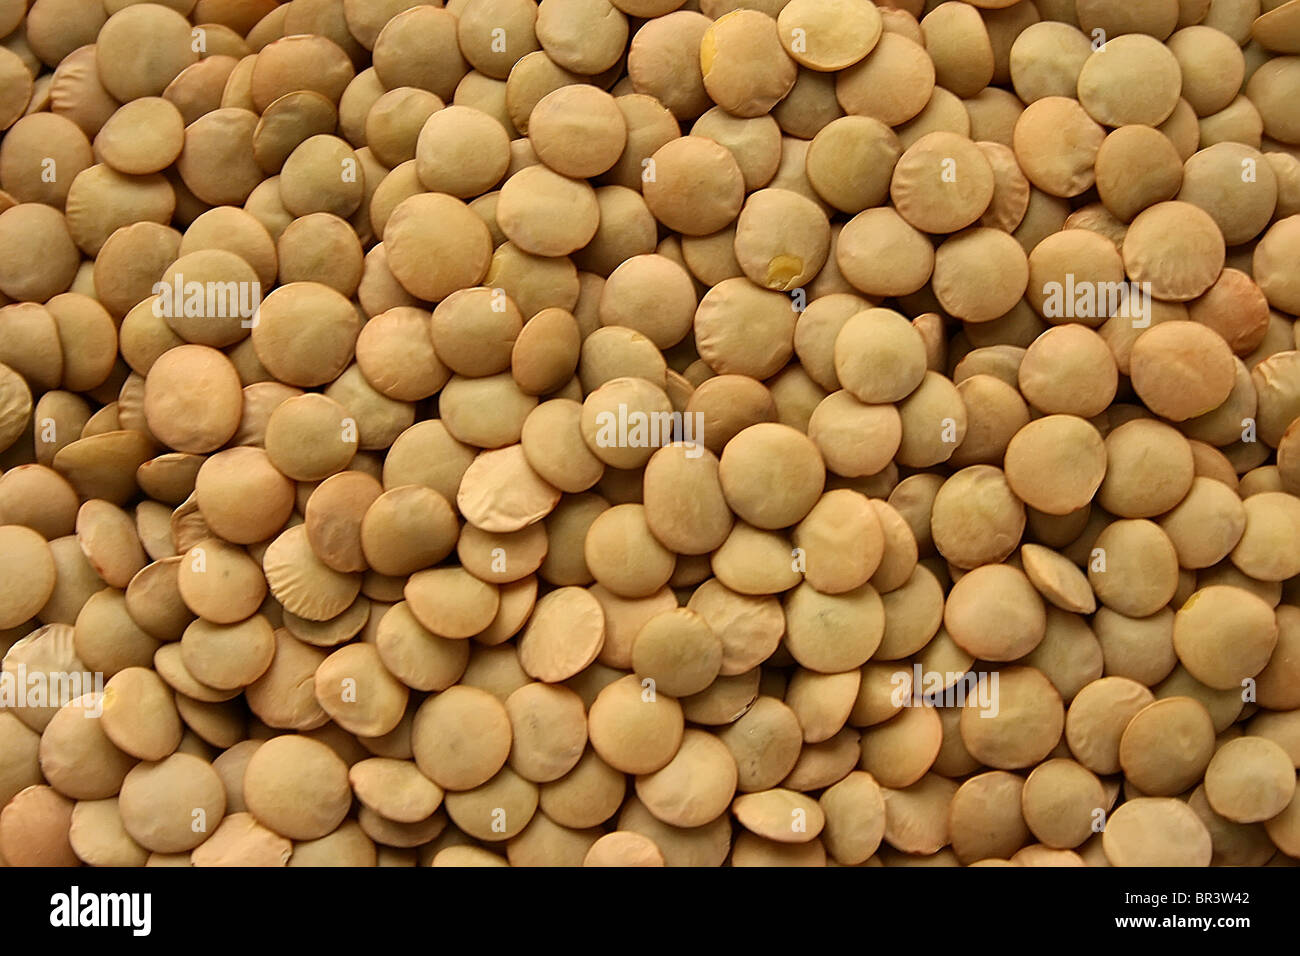 Lentil grains for culinary use Stock Photo